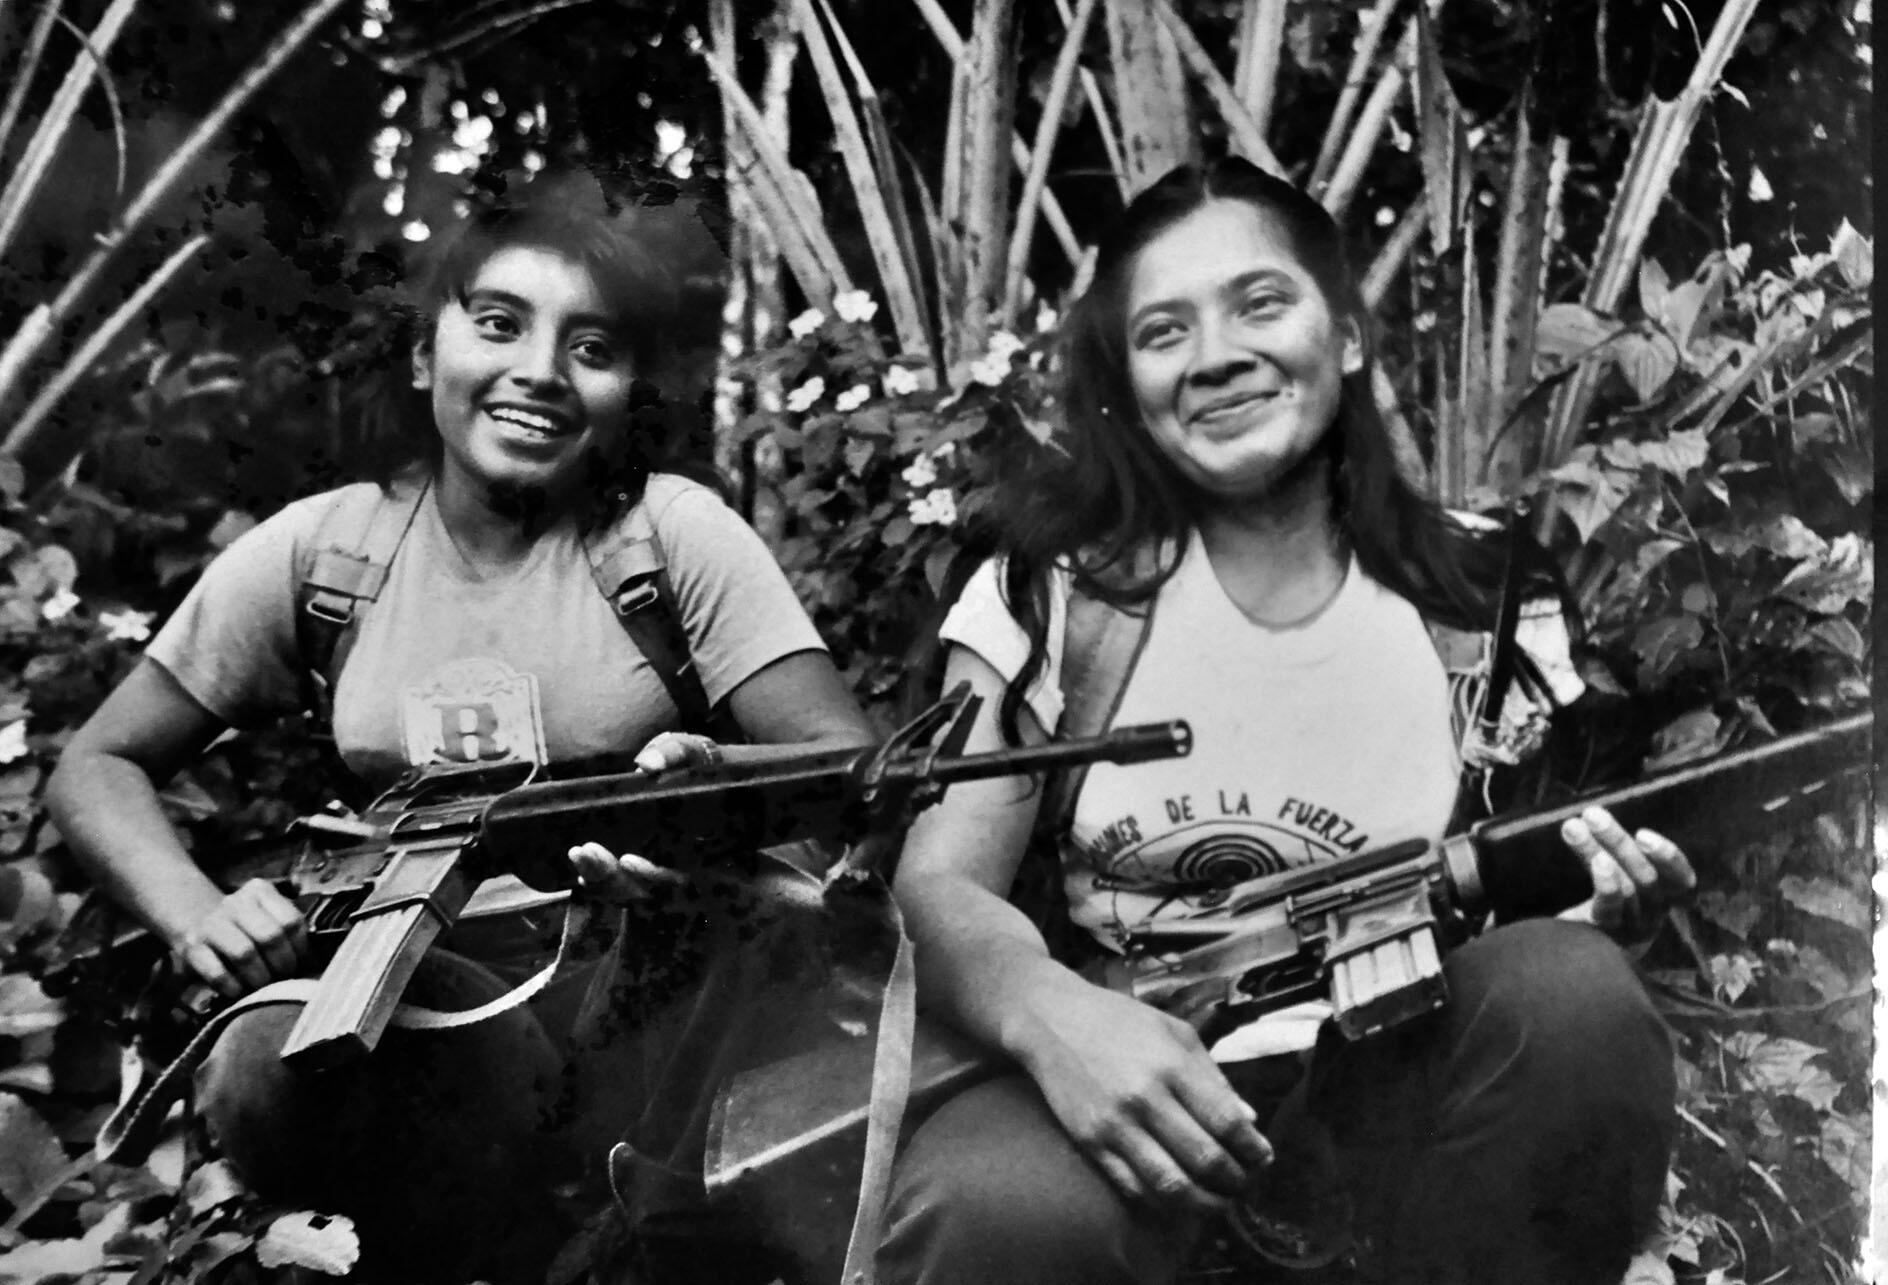 Two women Farabundo Martí National Liberation Front (FMLN) fighters holding guns smile at being photographed. (Photo courtesy of the Museo de la Revolucion, Perquin, El Salvador.)